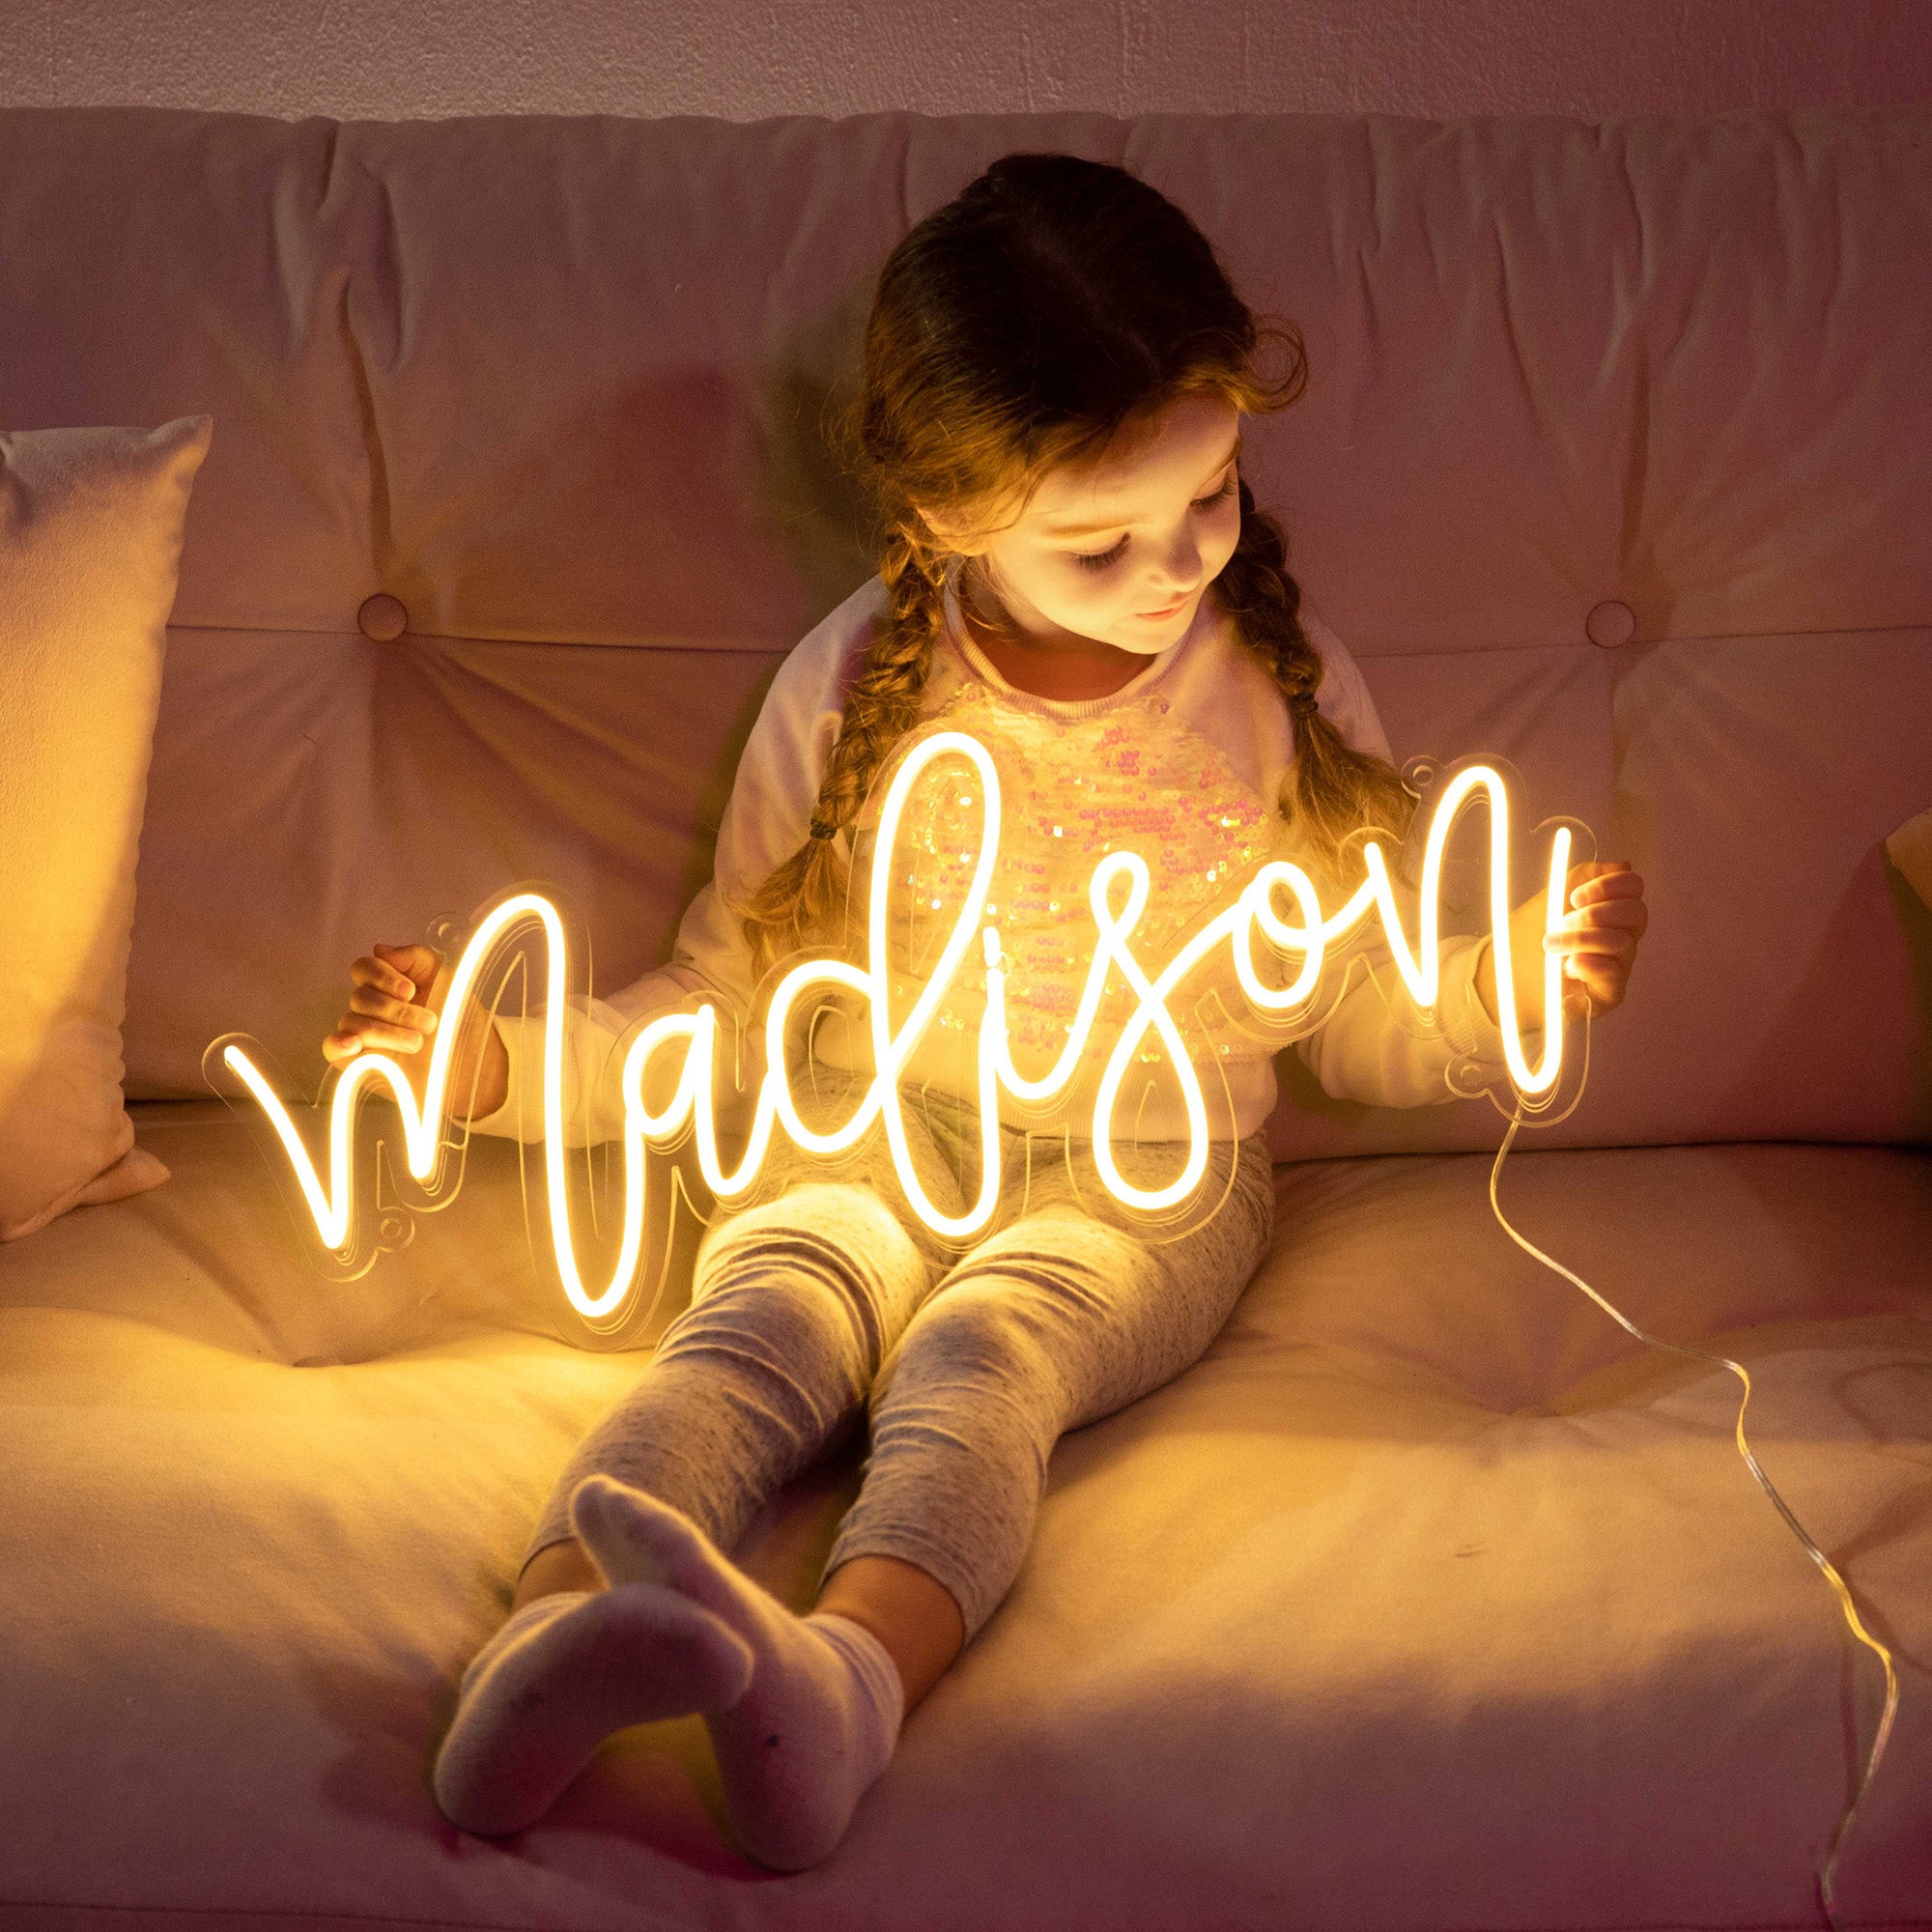 NEONIP-Personalized 100% Handmade LED Neon Sign with Your Name